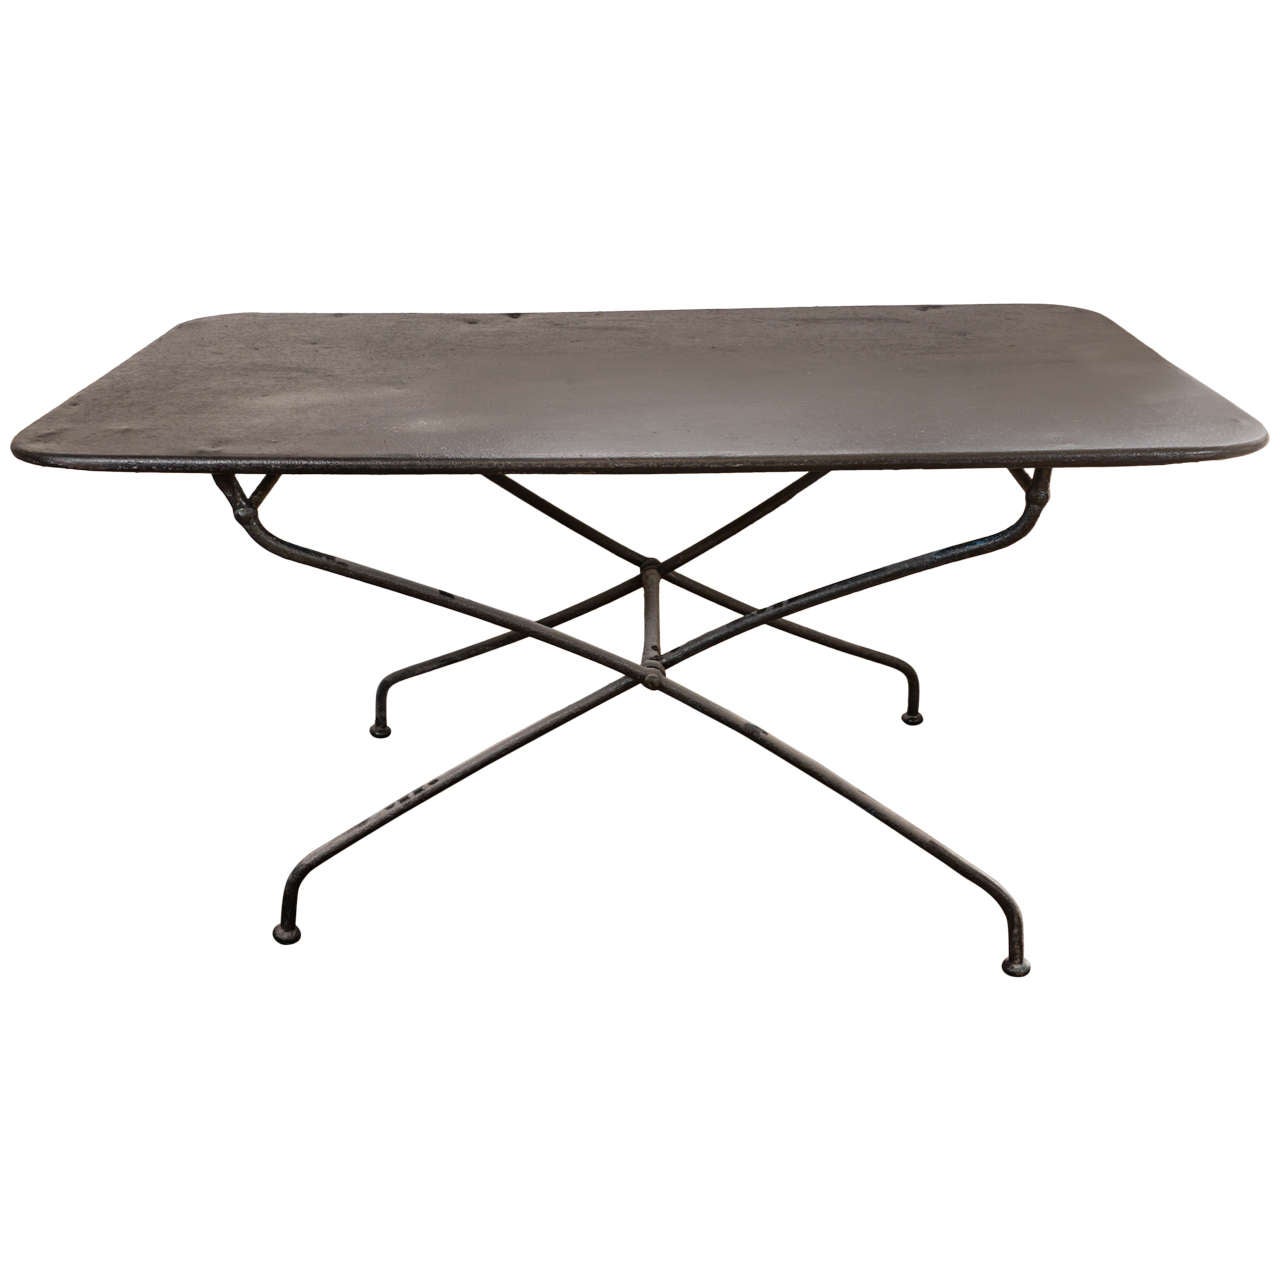 Iron Folding Table For Sale